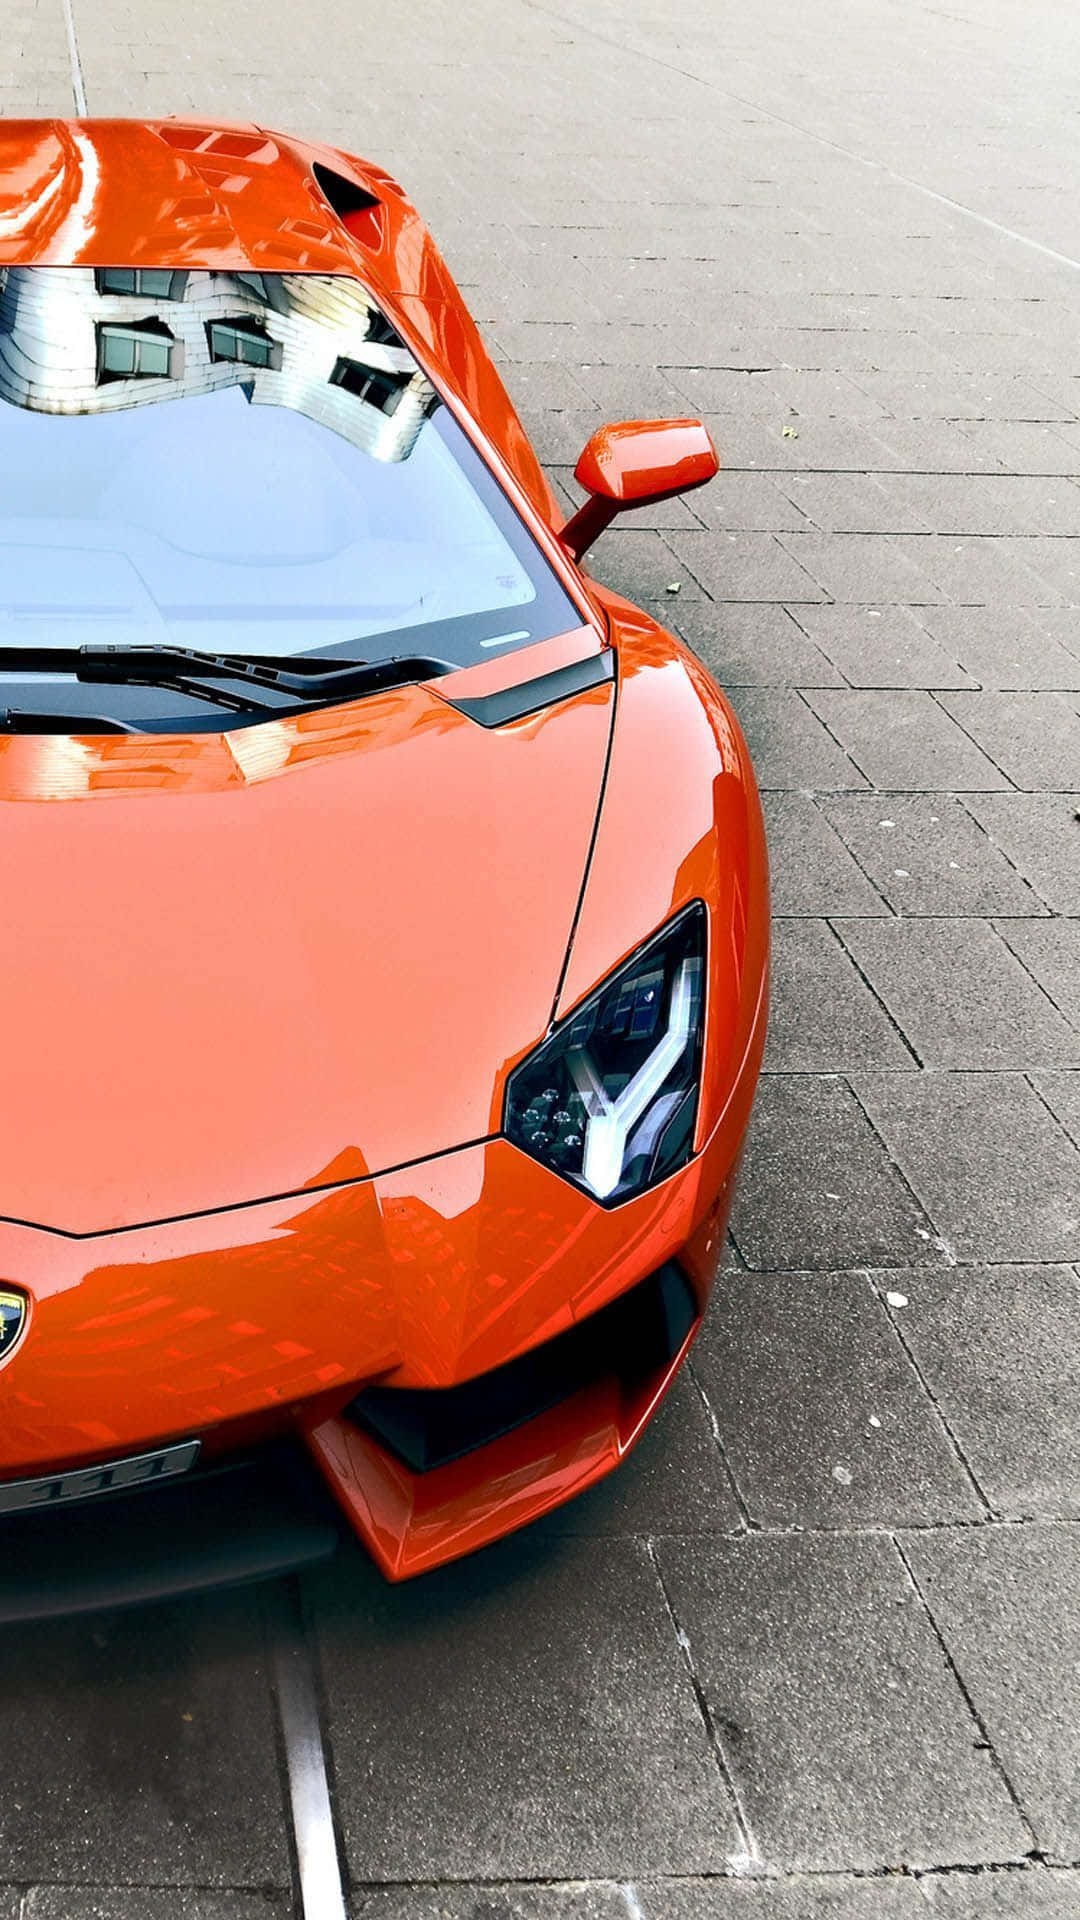 An Orange Sports Car Is Parked On The Street Wallpaper